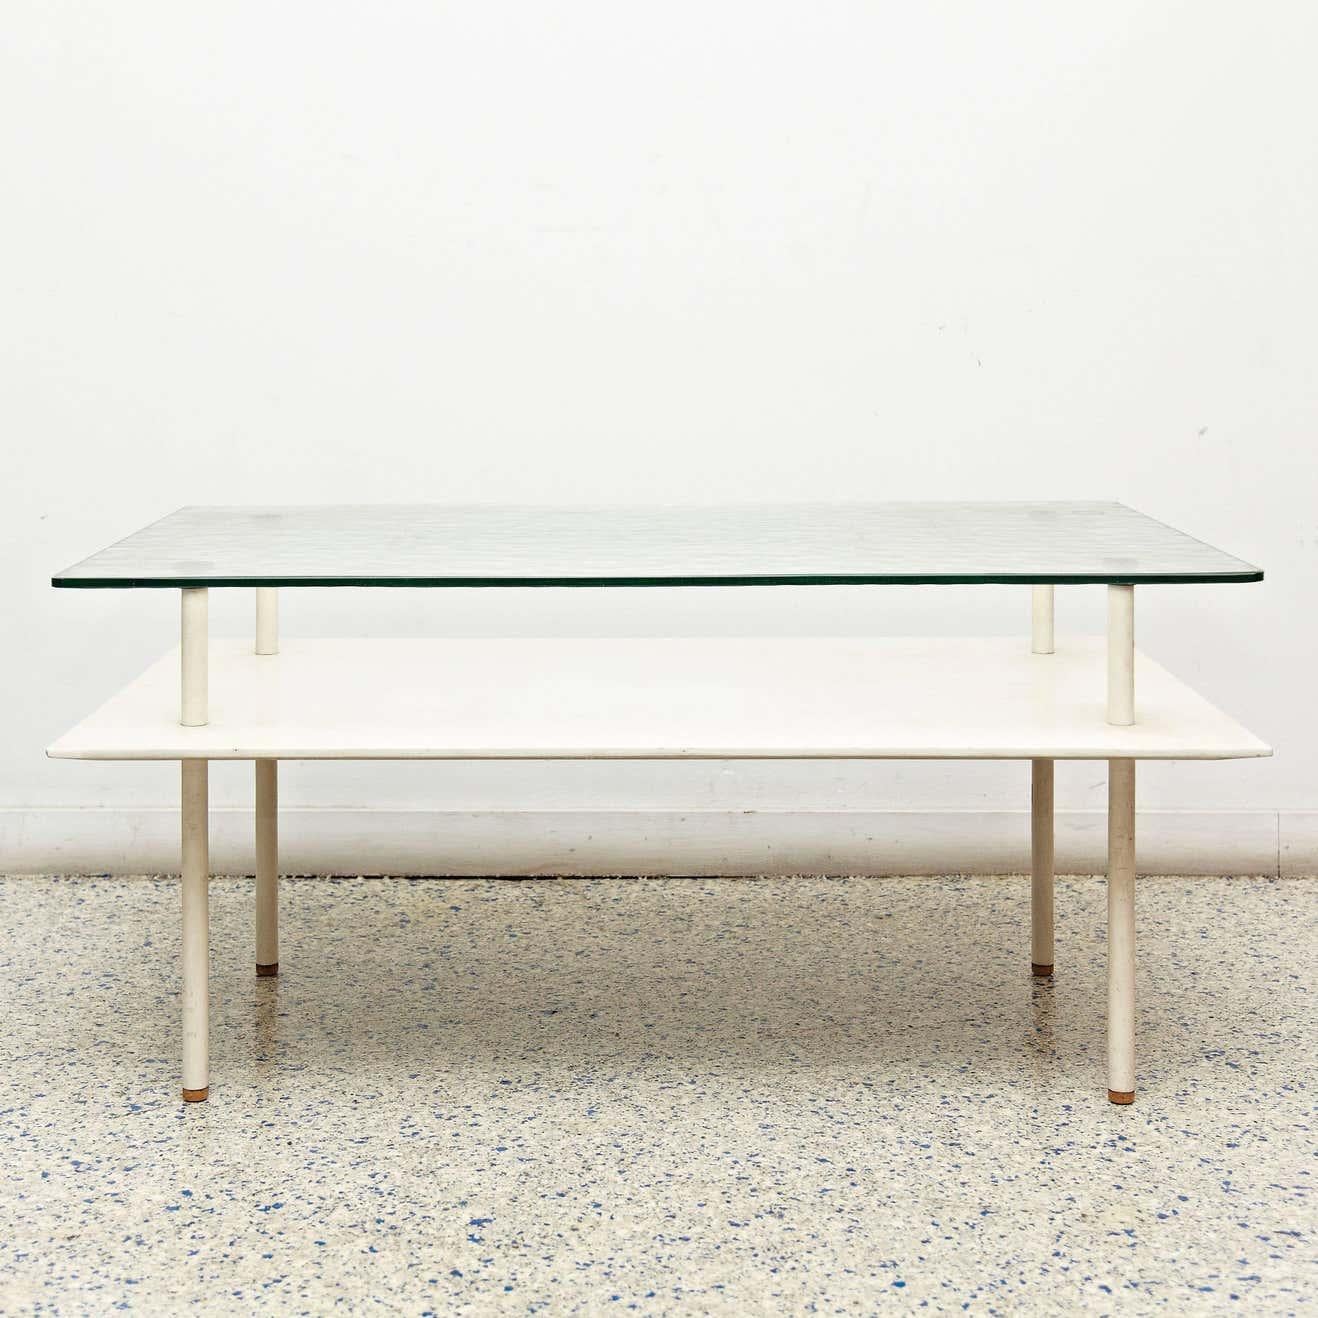 Coffee table designed by Elmar Berkovich, circa 1930.
Manufactured by Metz and Co. (Netherlands).
Tubular legs, wood shelve and thick glass top.

In good condition, with minor wear consistent with age and use, preserving a nice patina and a few